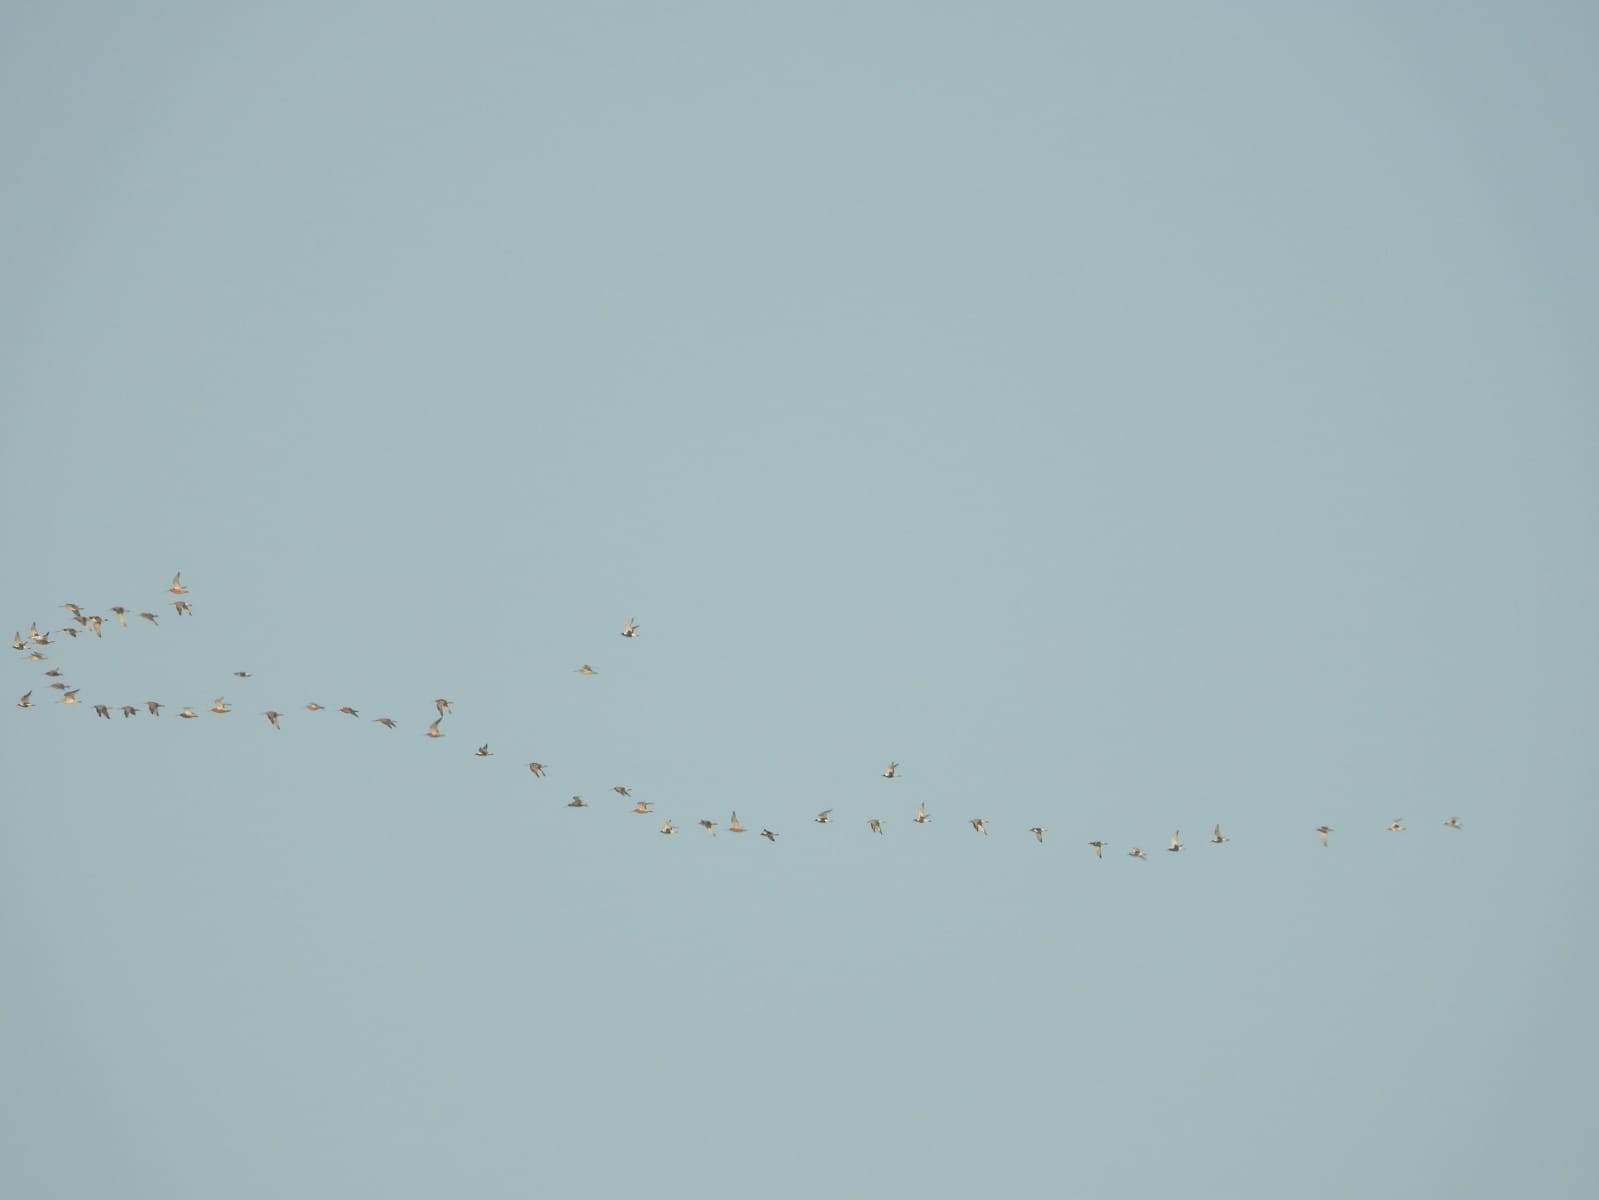 Migration has started for other wader species, here a mixed-species flock of bar-tailed godwit and grey plover leaving from Baie d’Aouatif just before sunset. Photo: Tim Oortwijn